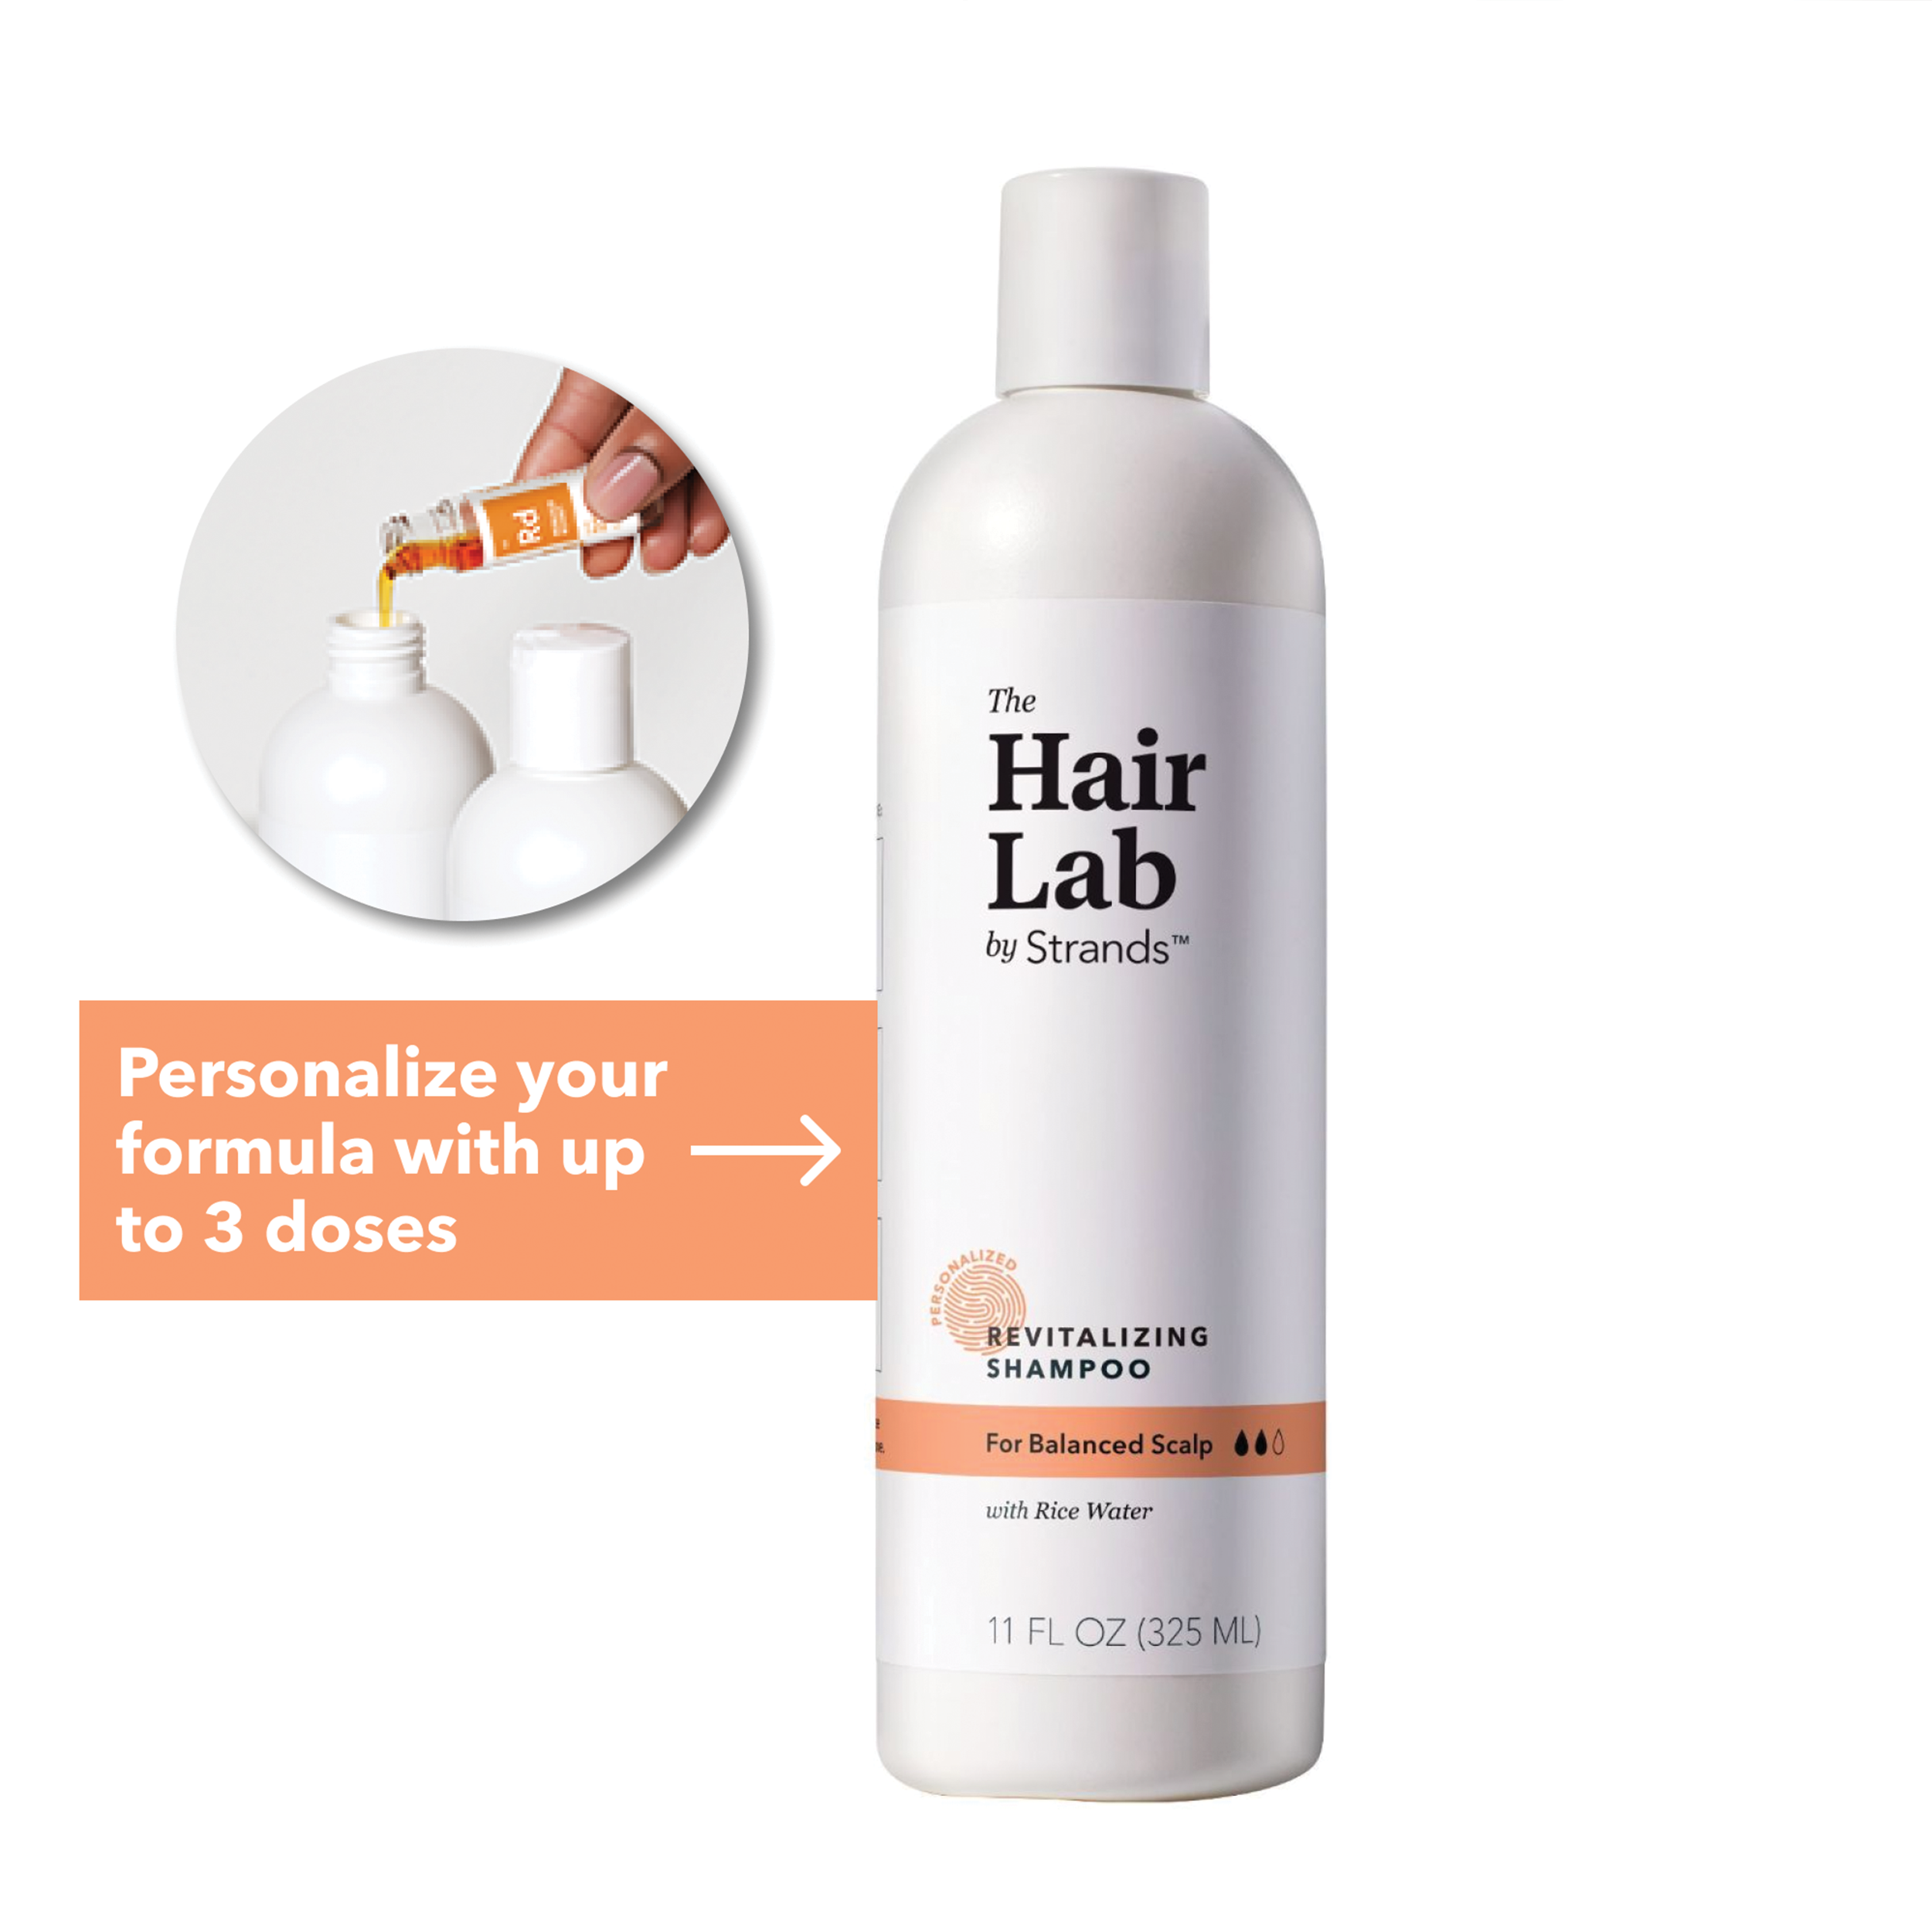 The Hair Lab Revitalizing Shampoo with Rice Water for Balanced Scalp, Sulfate & Paraben Free, 11 oz. - image 3 of 9